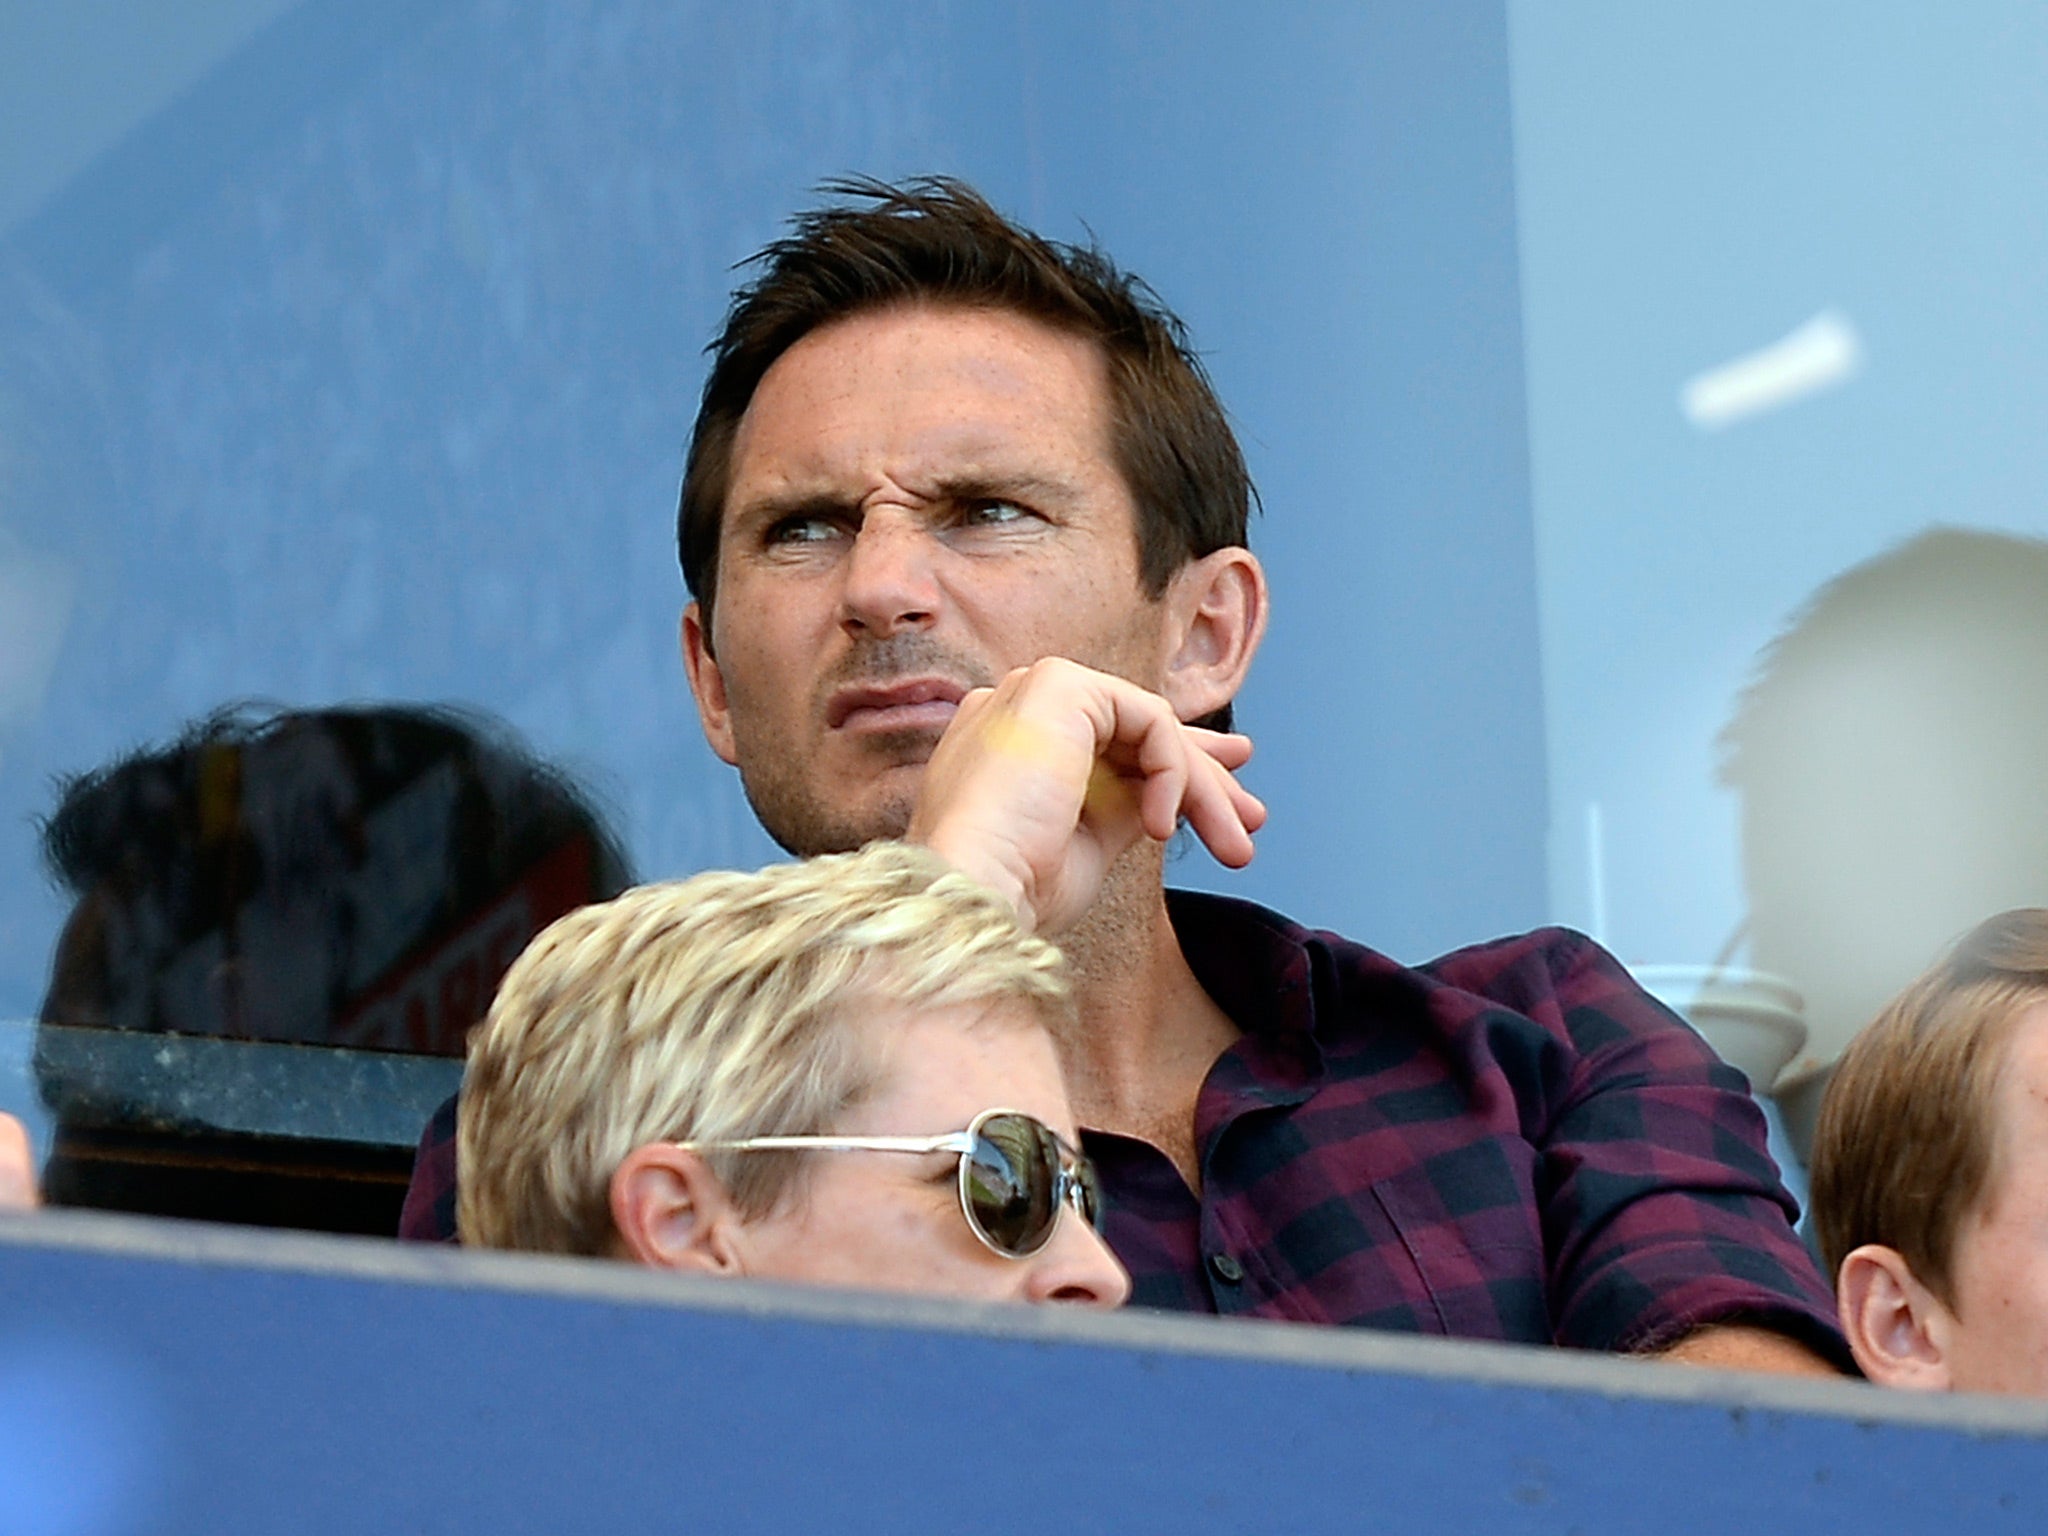 Frank Lampard joined New York City after a long and successful career in English football